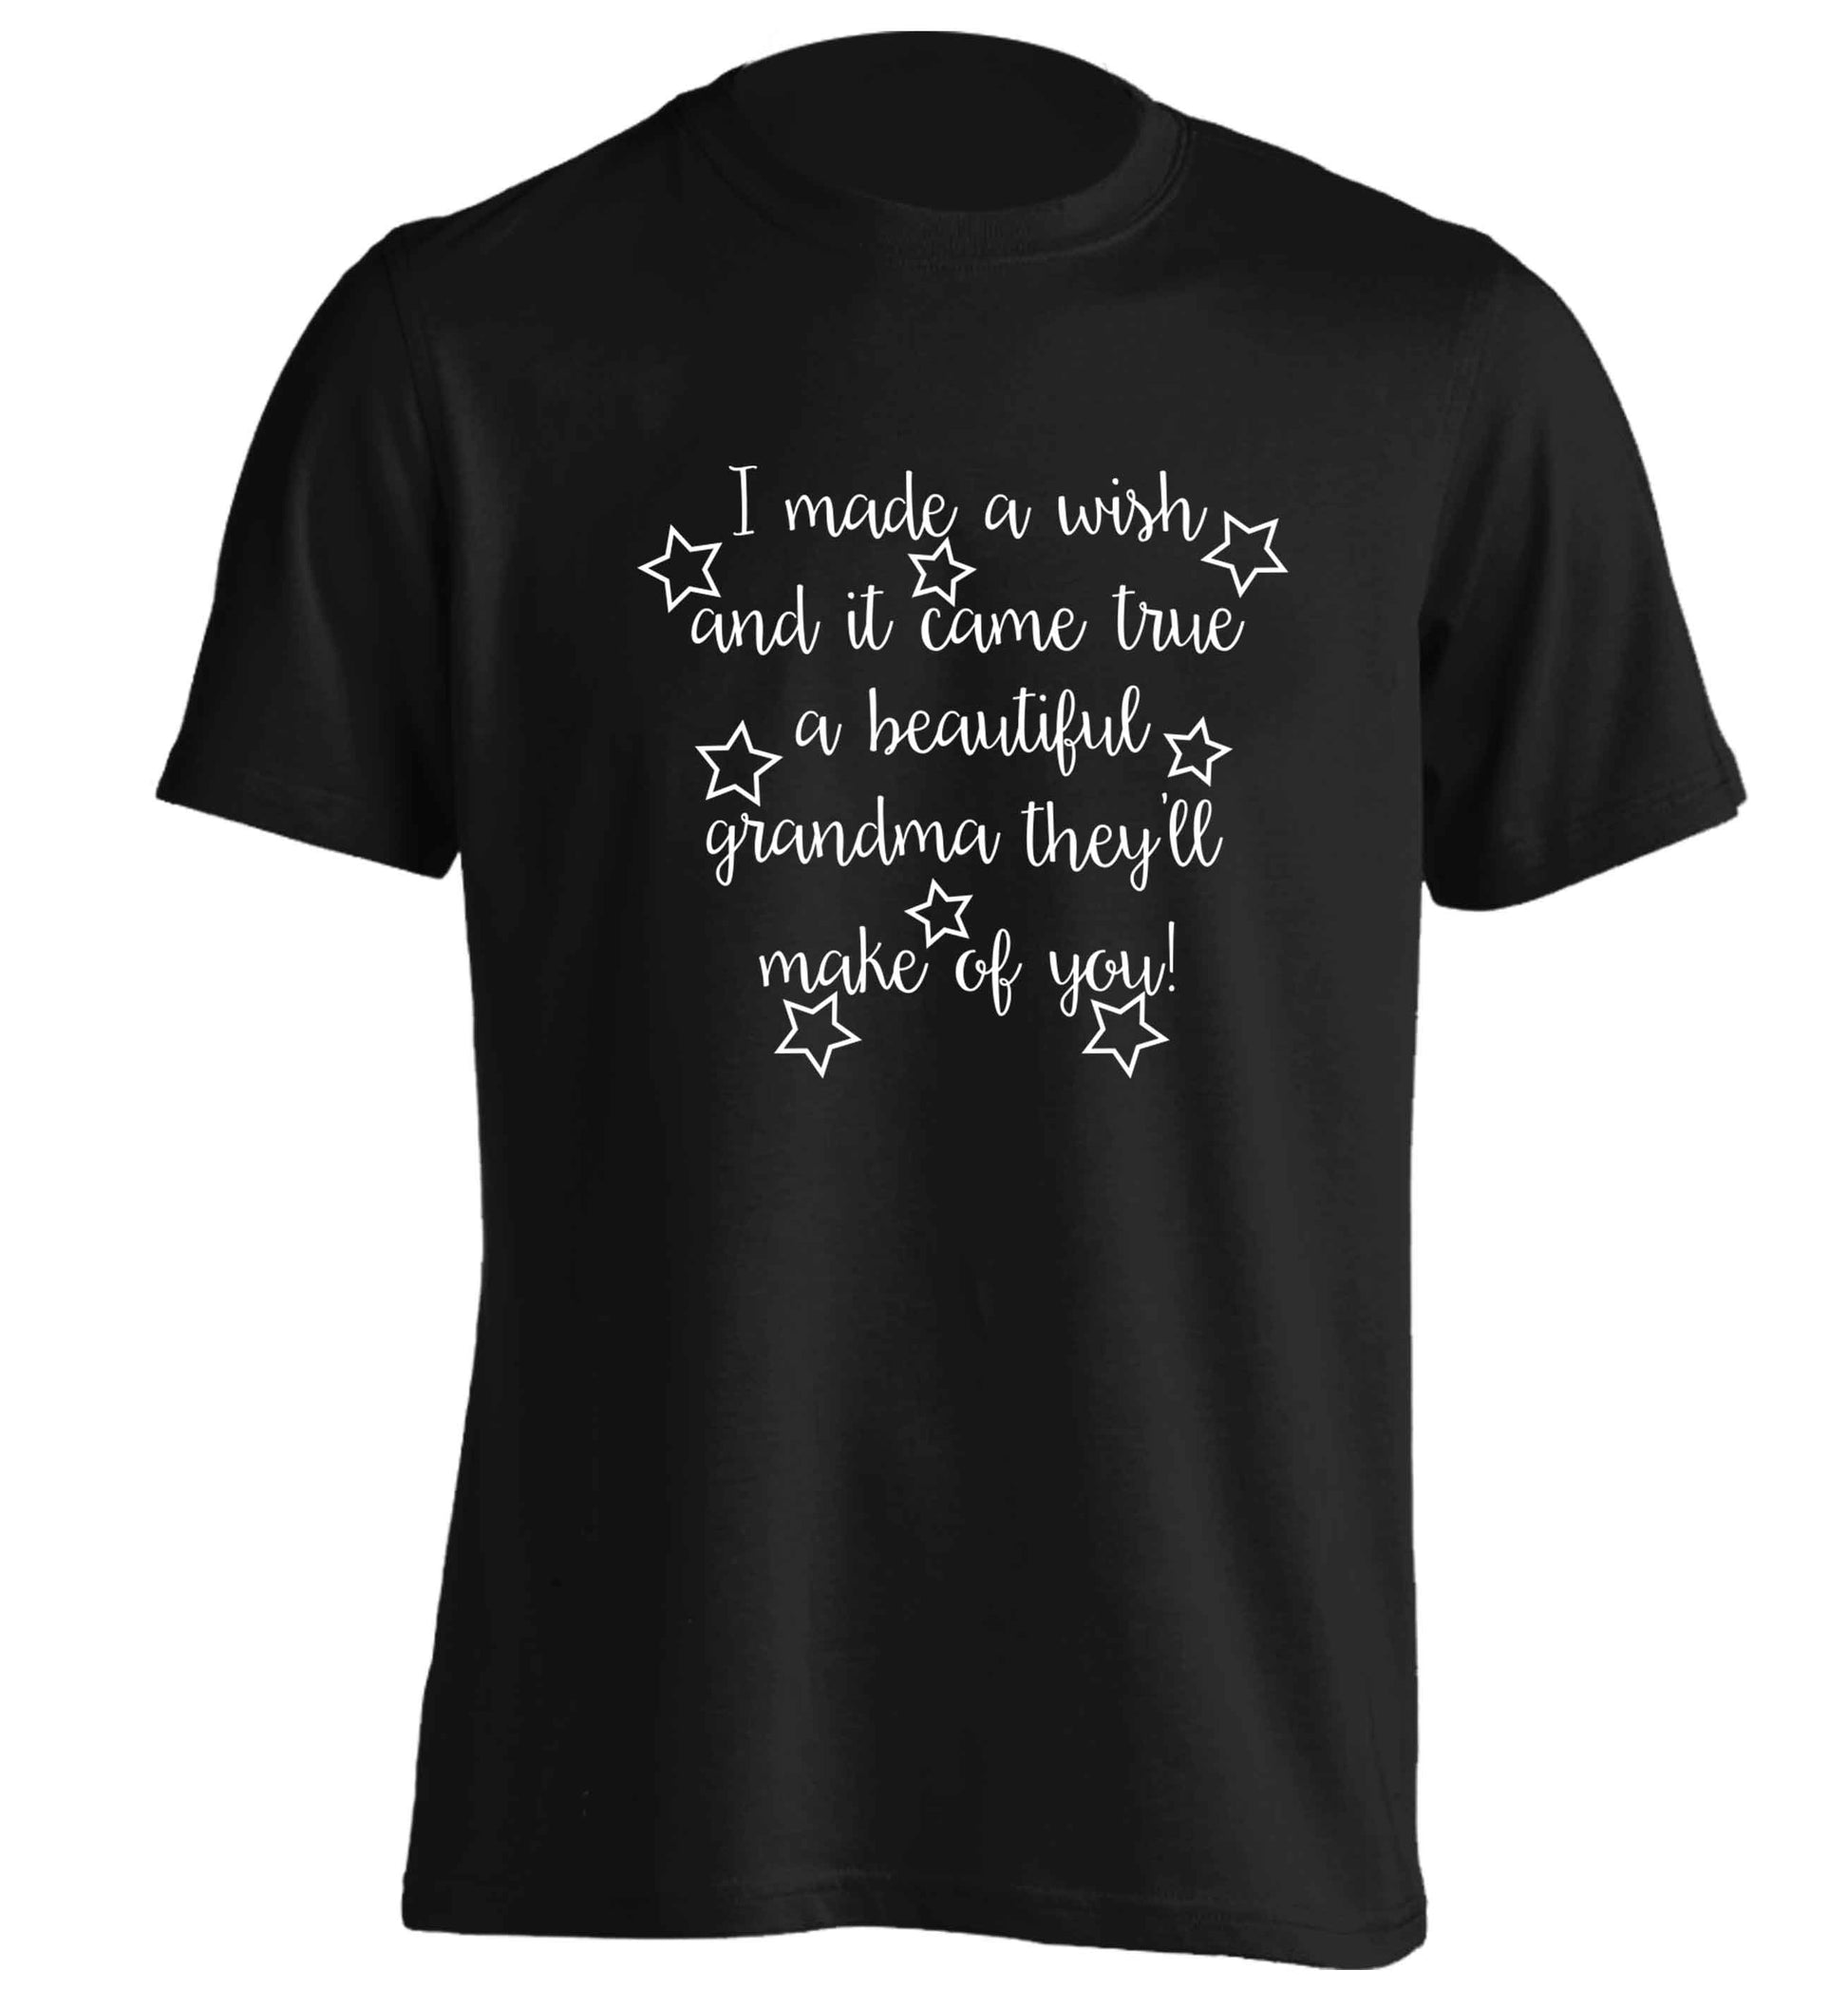 I made a wish and it came true a beautiful grandma they'll make of you! adults unisex black Tshirt 2XL